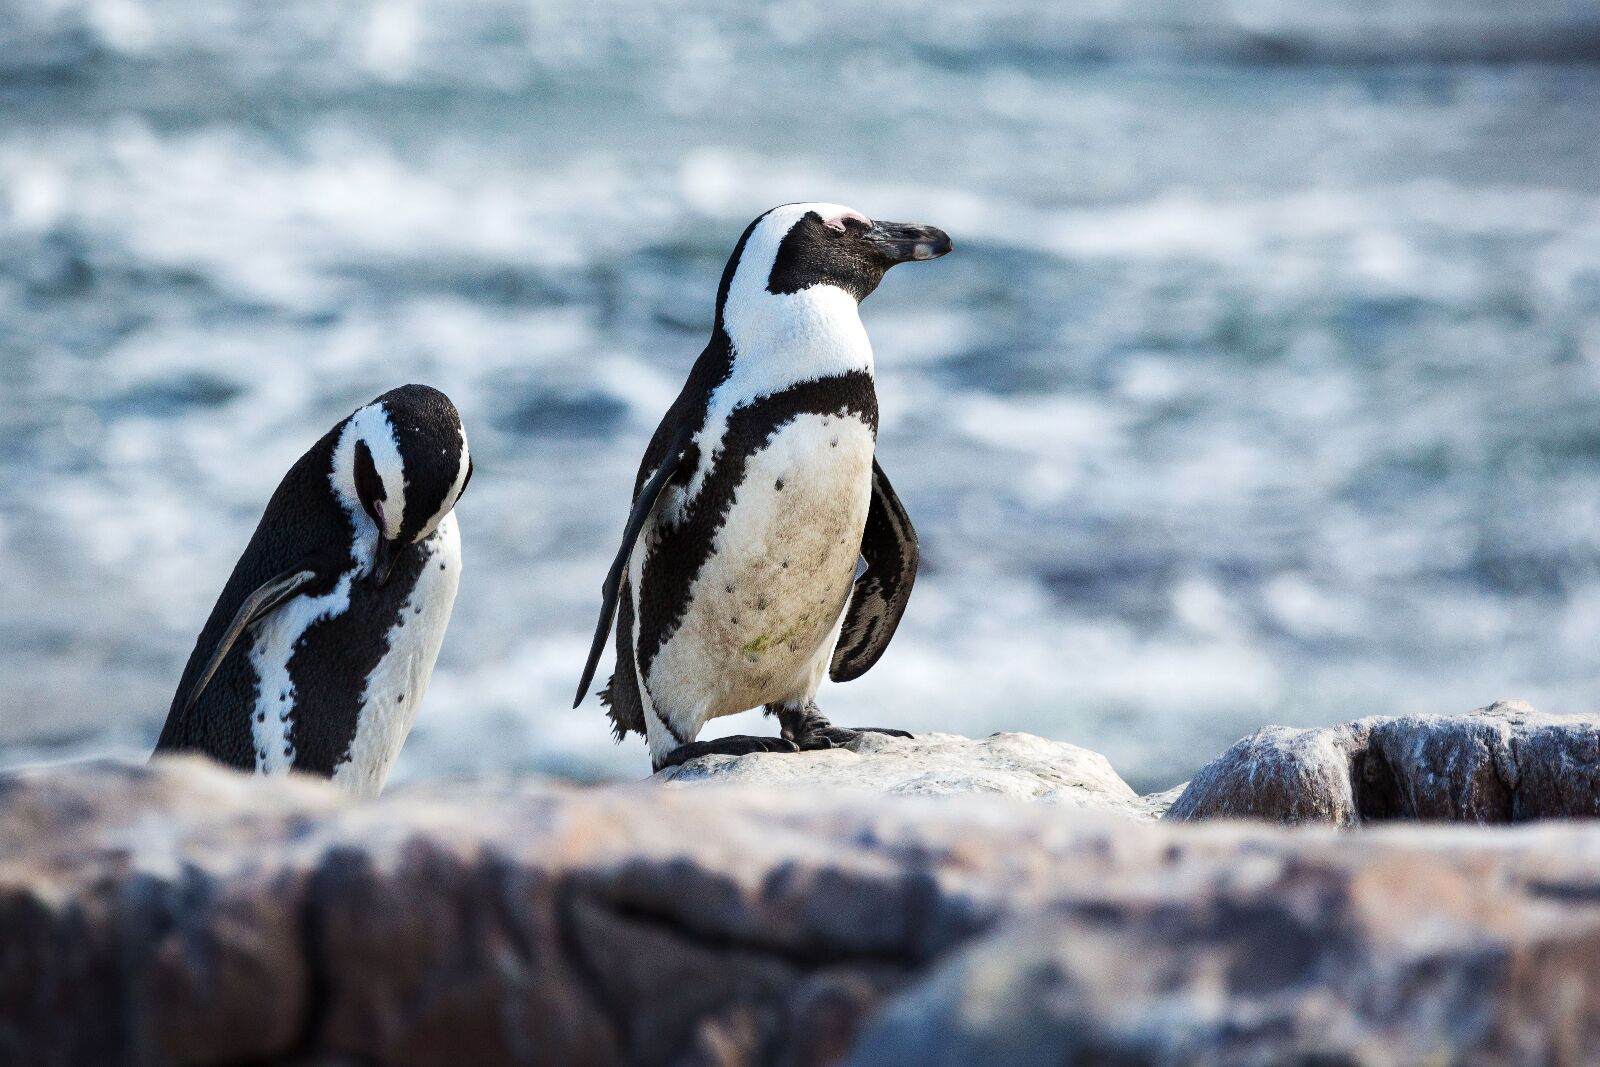 African penguin (Spheniscus demersus) on a stone close to the sea, enjoying the sun, Betty's Bay, South Africa, Betty's bay penguins